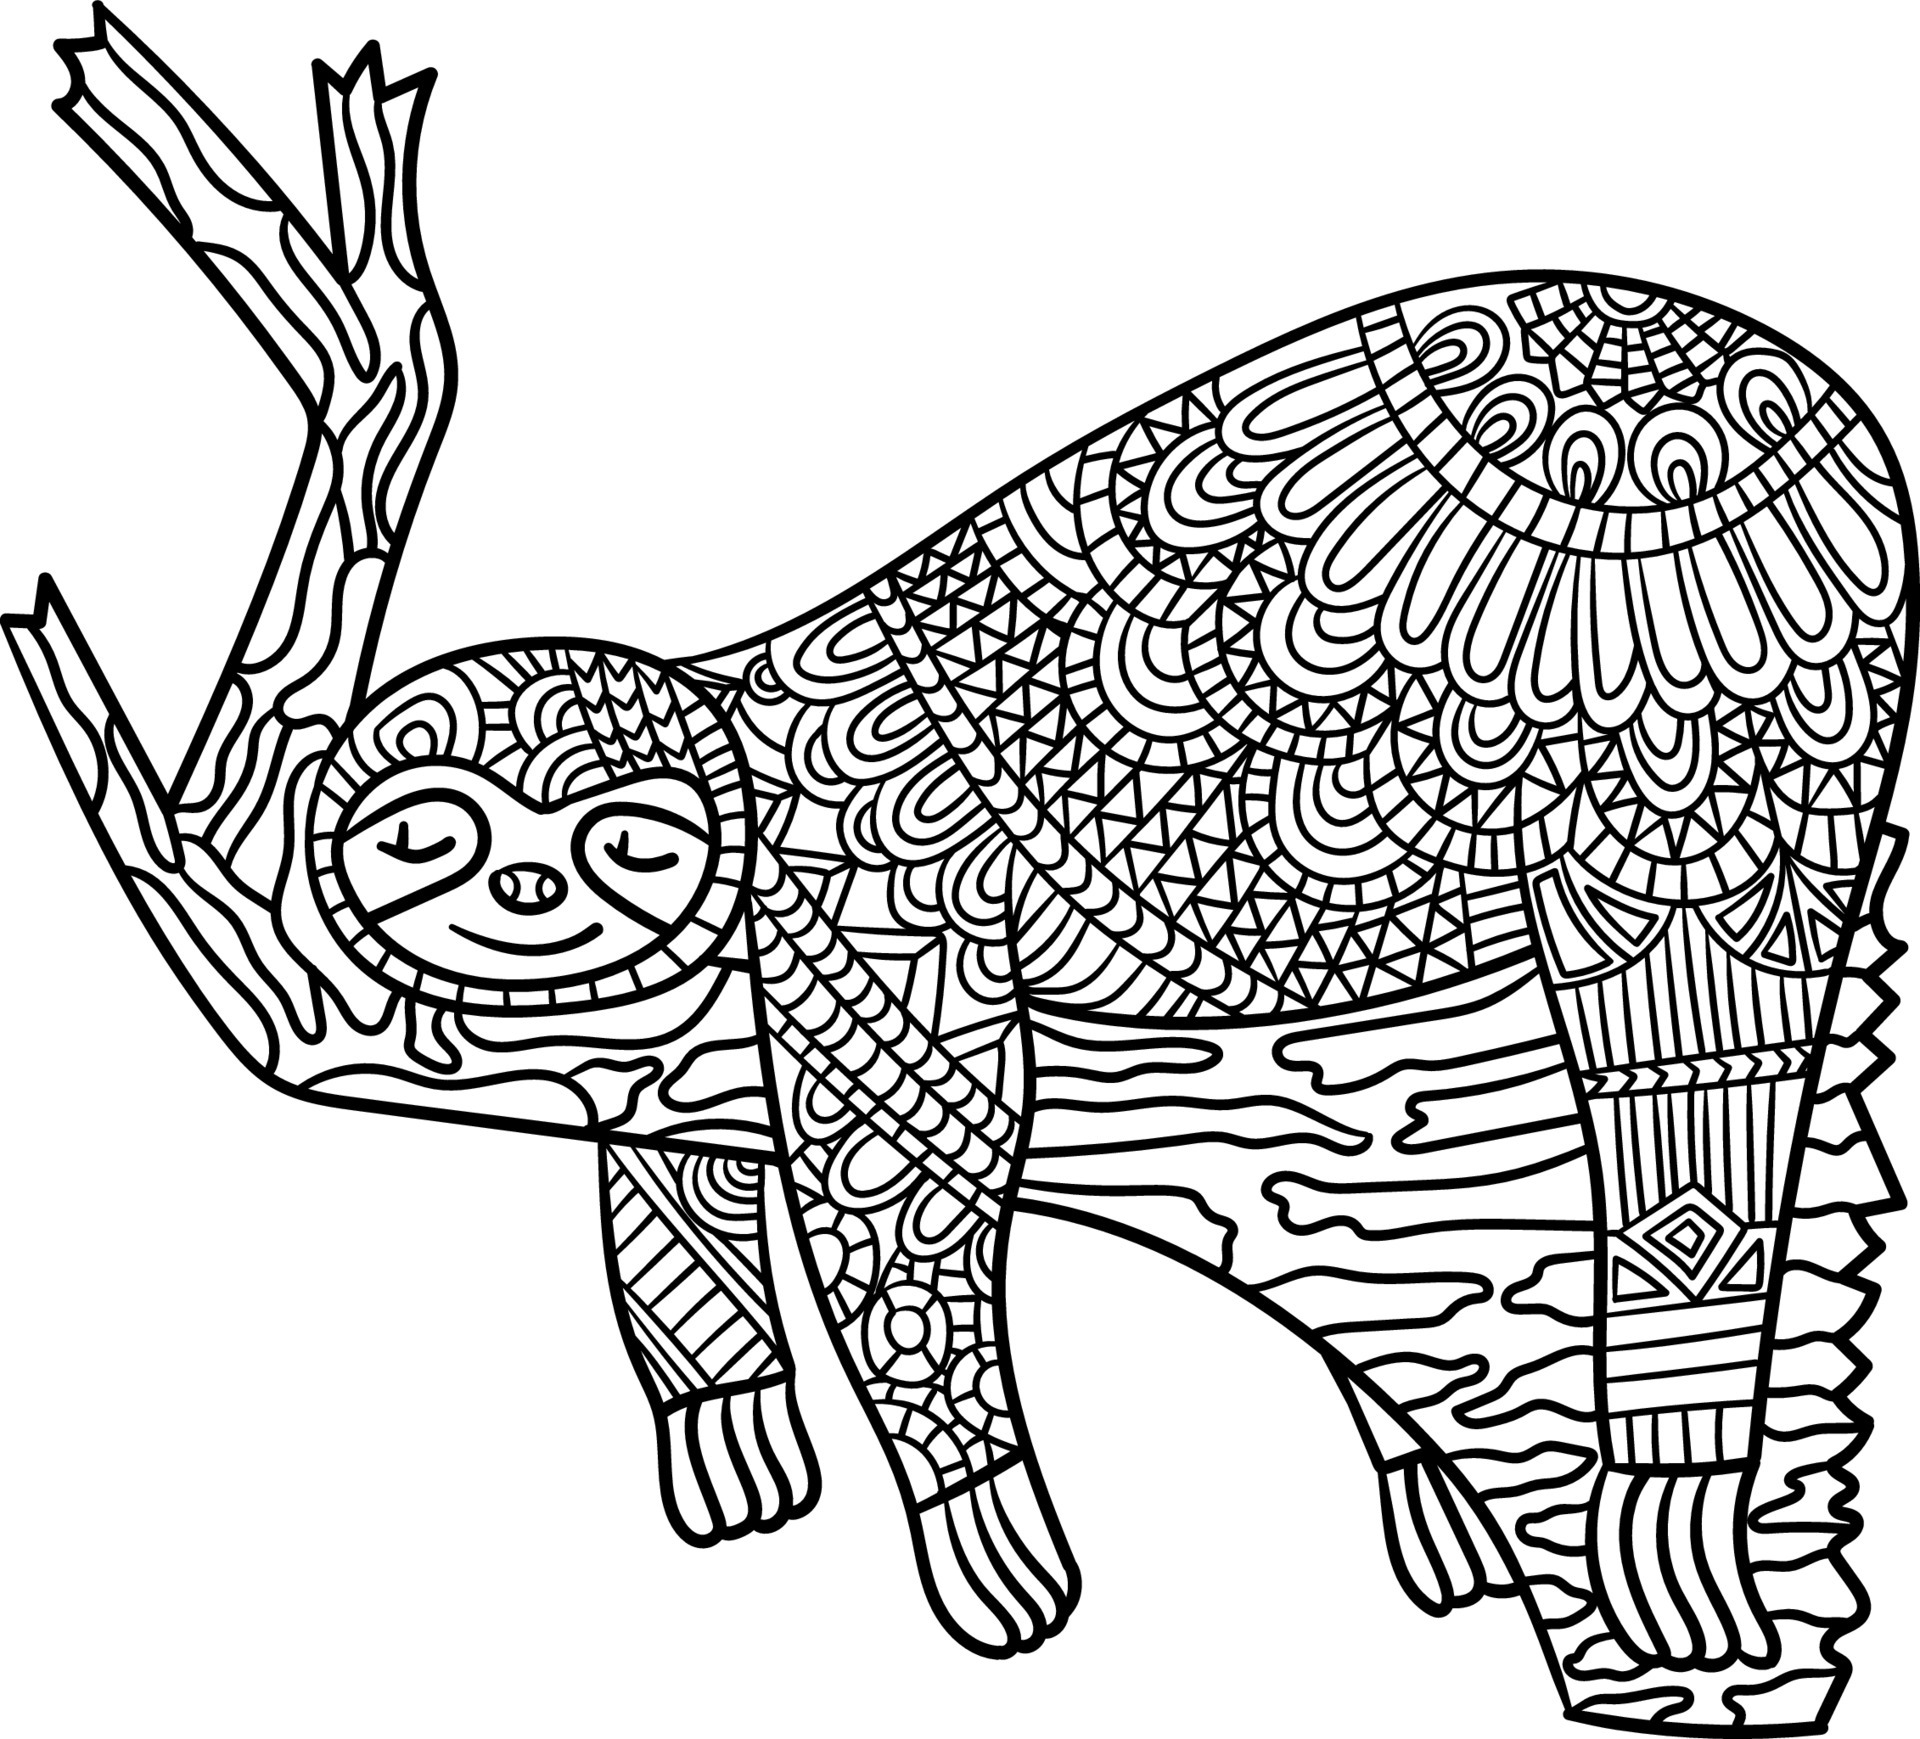 Sleeping Sloth On A Branch Mandala Coloring Pages 6458181 Vector Art at  Vecteezy